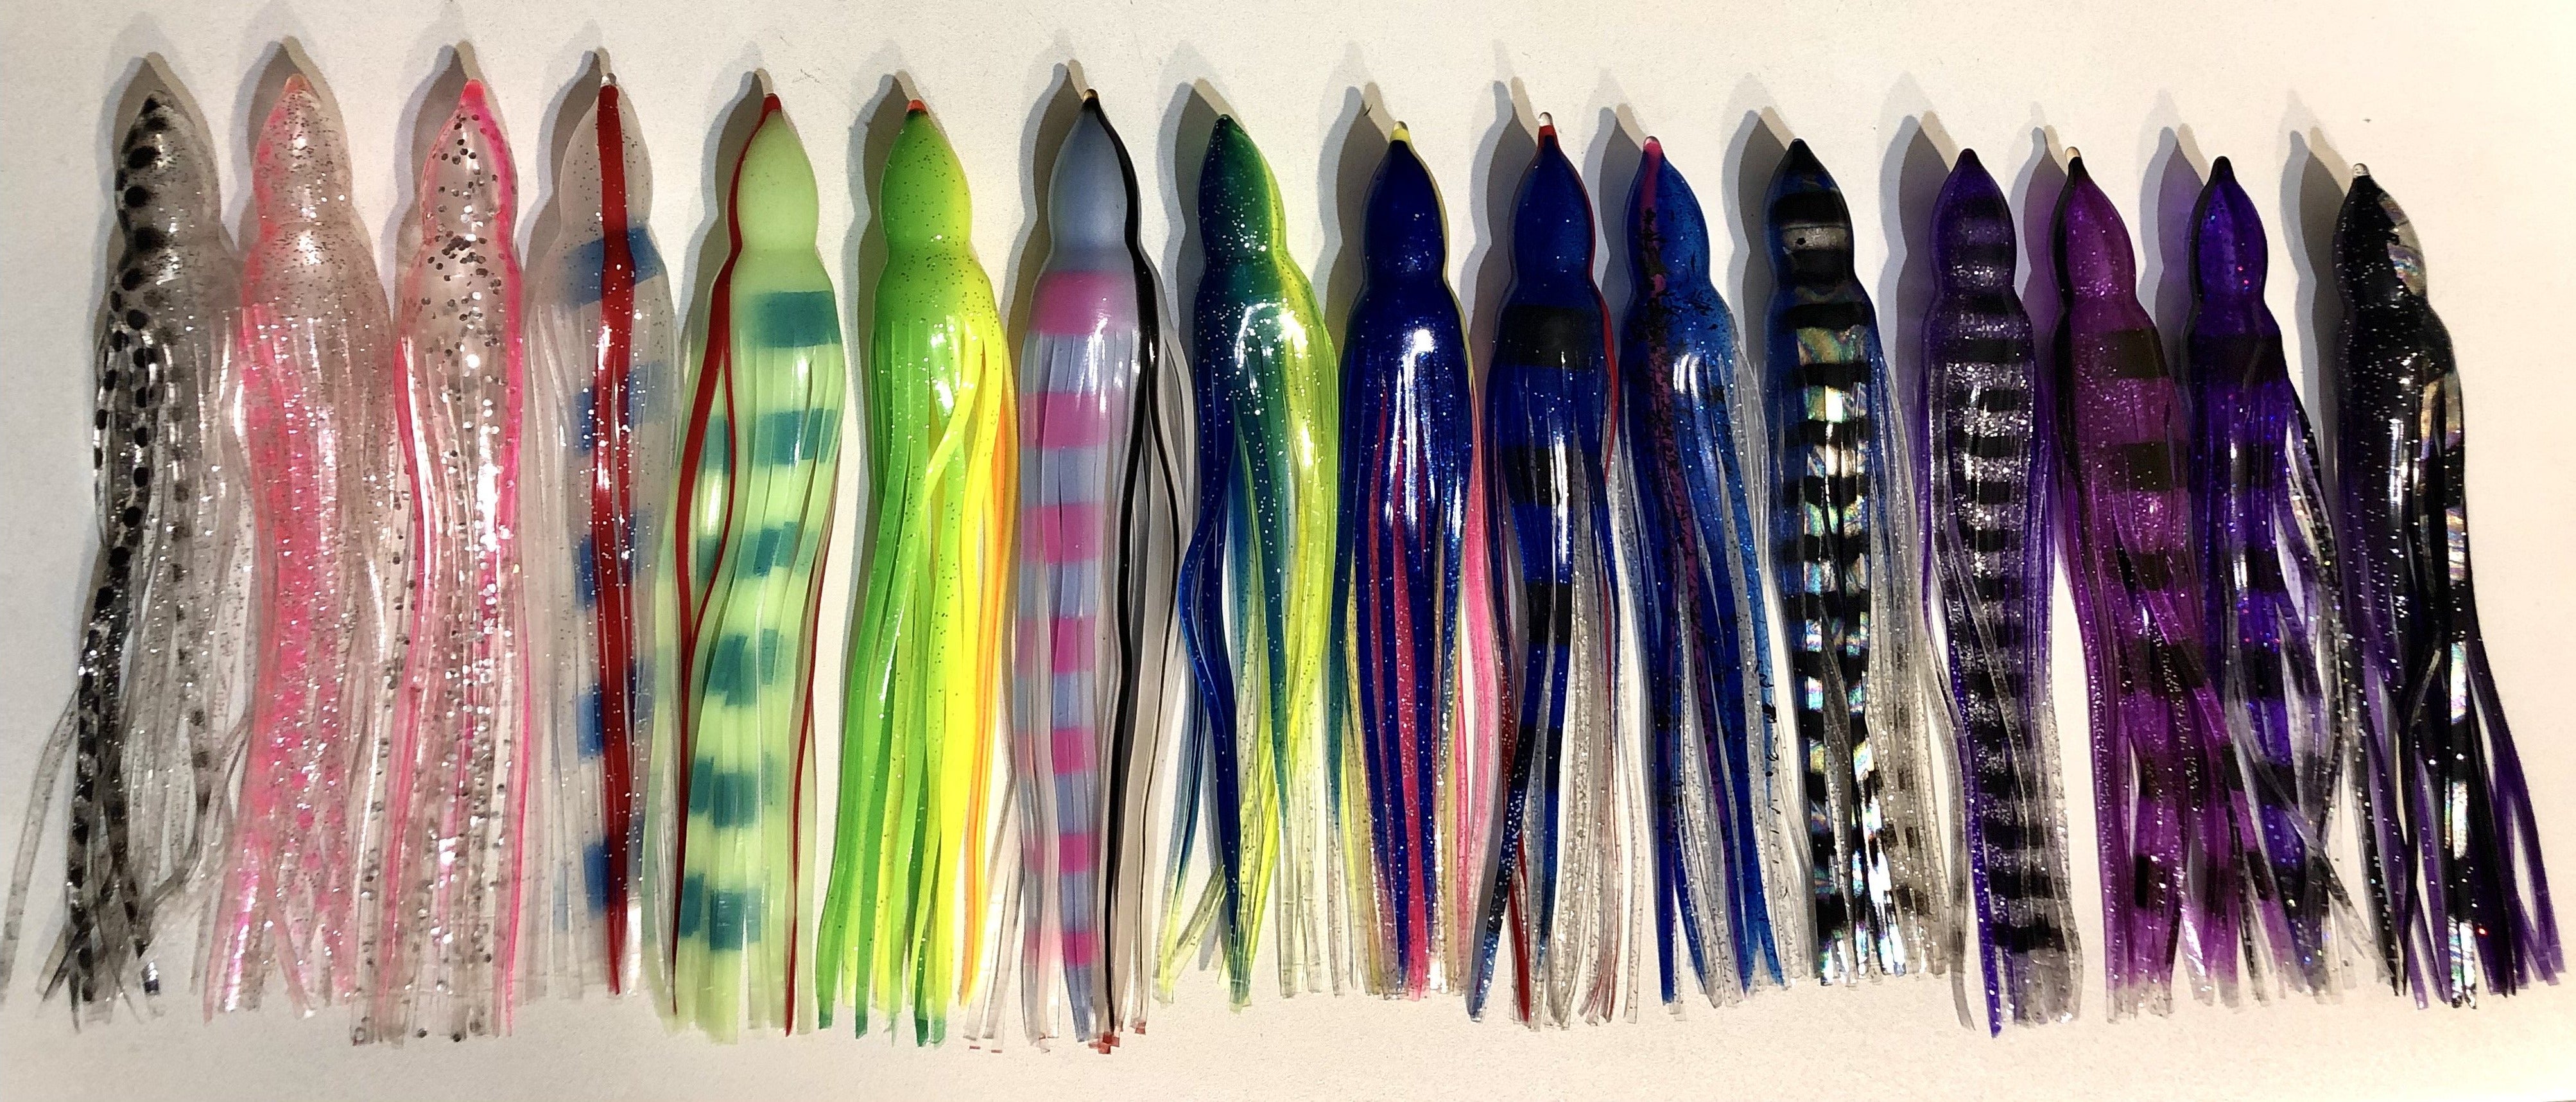 6.5-7 Inch/17cm Octopus Replacement Skirts for Gamefishing Lures